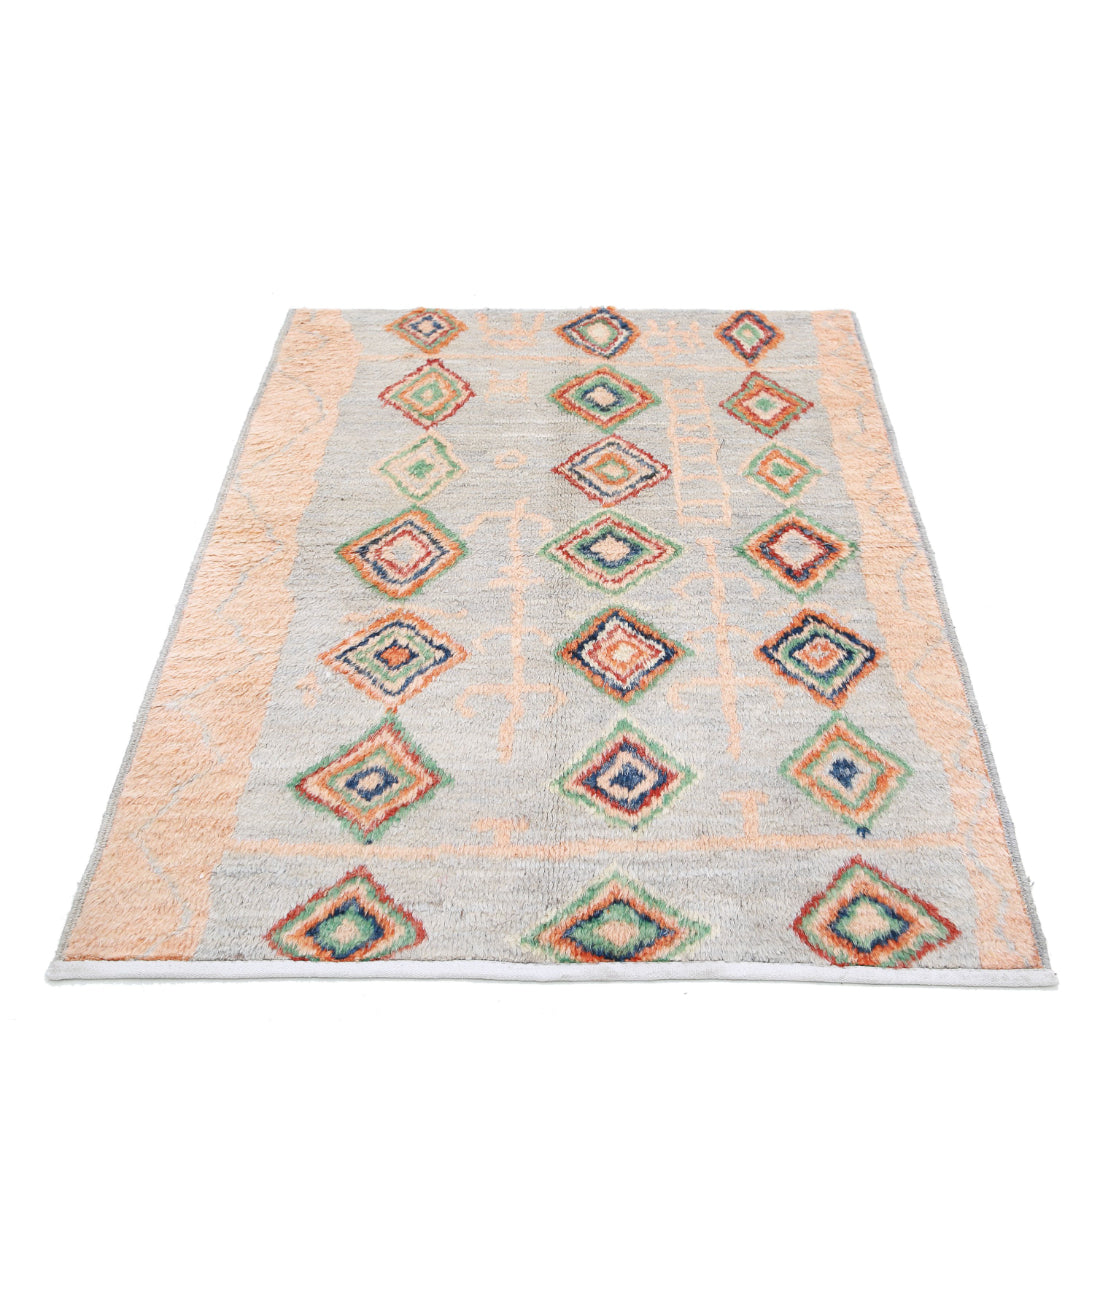 Hand Knotted Tribal Moroccan Wool Rug - 4'2'' x 5'9'' 4'2'' x 5'9'' (125 X 173) / Blue / Brown